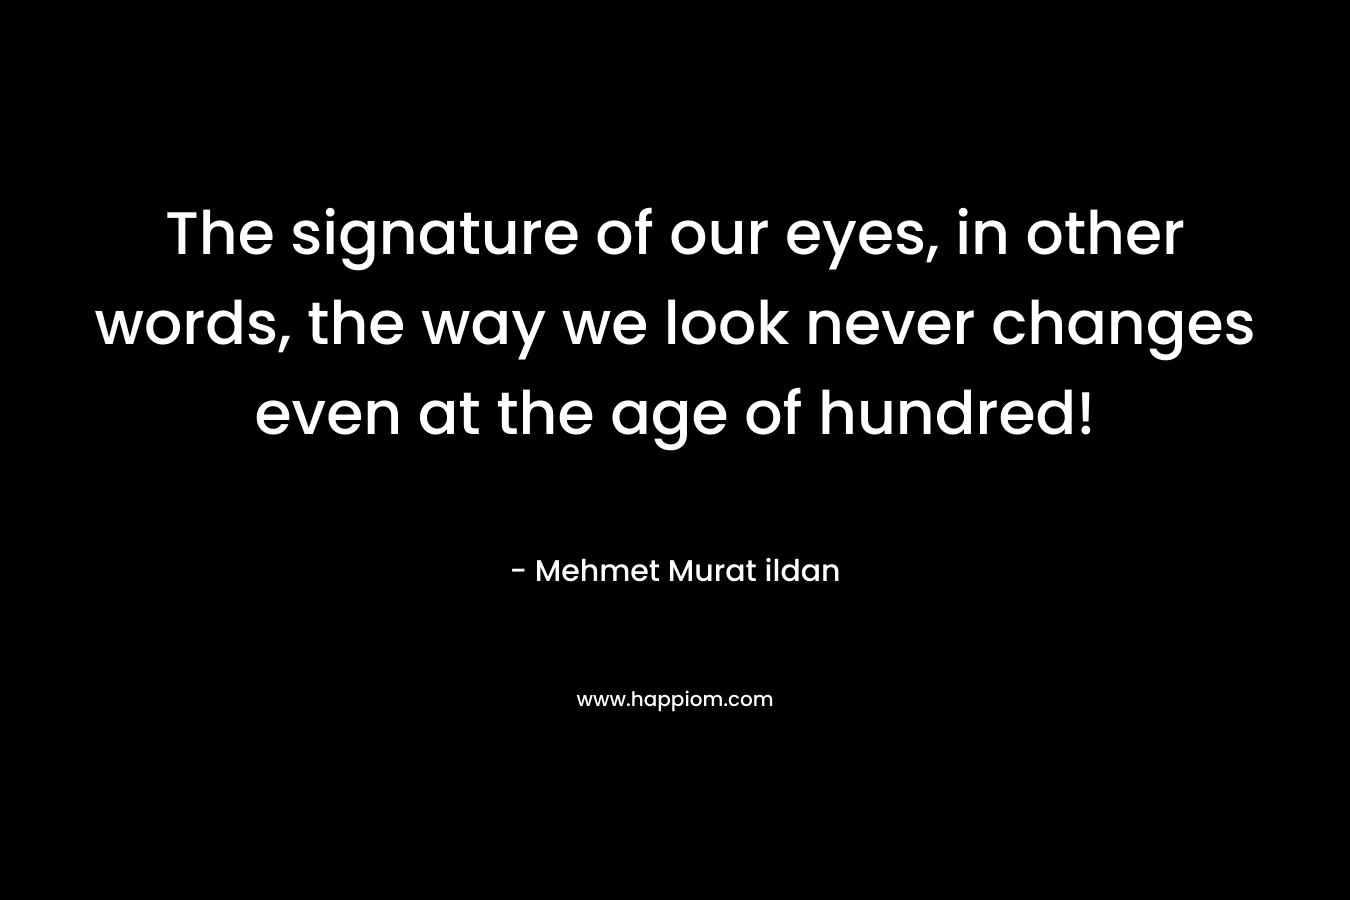 The signature of our eyes, in other words, the way we look never changes even at the age of hundred!